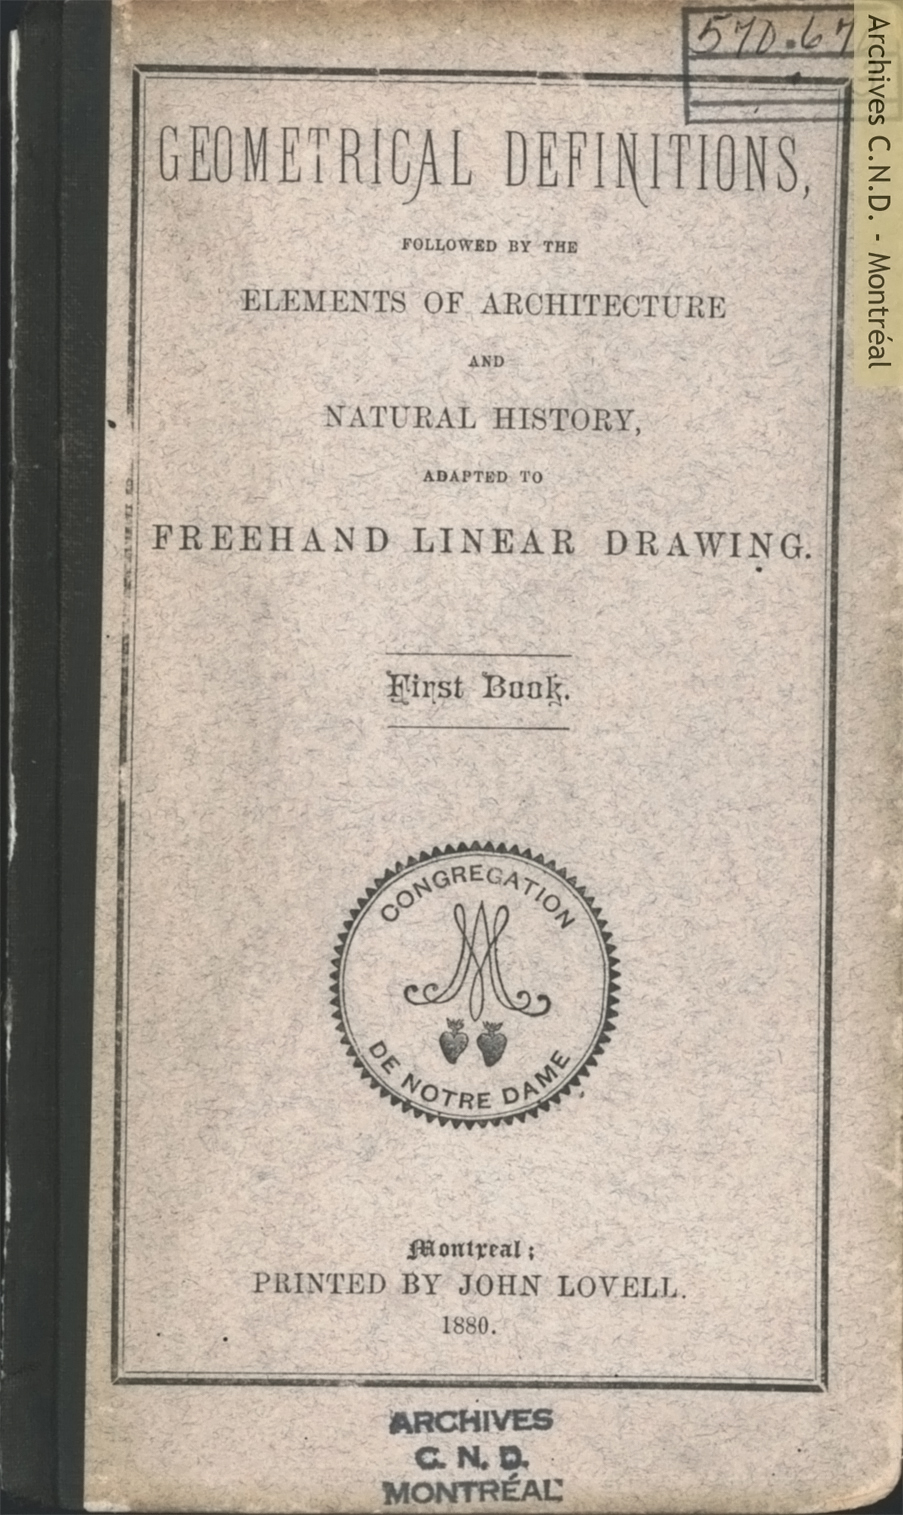 Cover page - Geometrical definitions, followed by the elements of architecture and natural history, adapted to Freehand Linear Drawing - First book